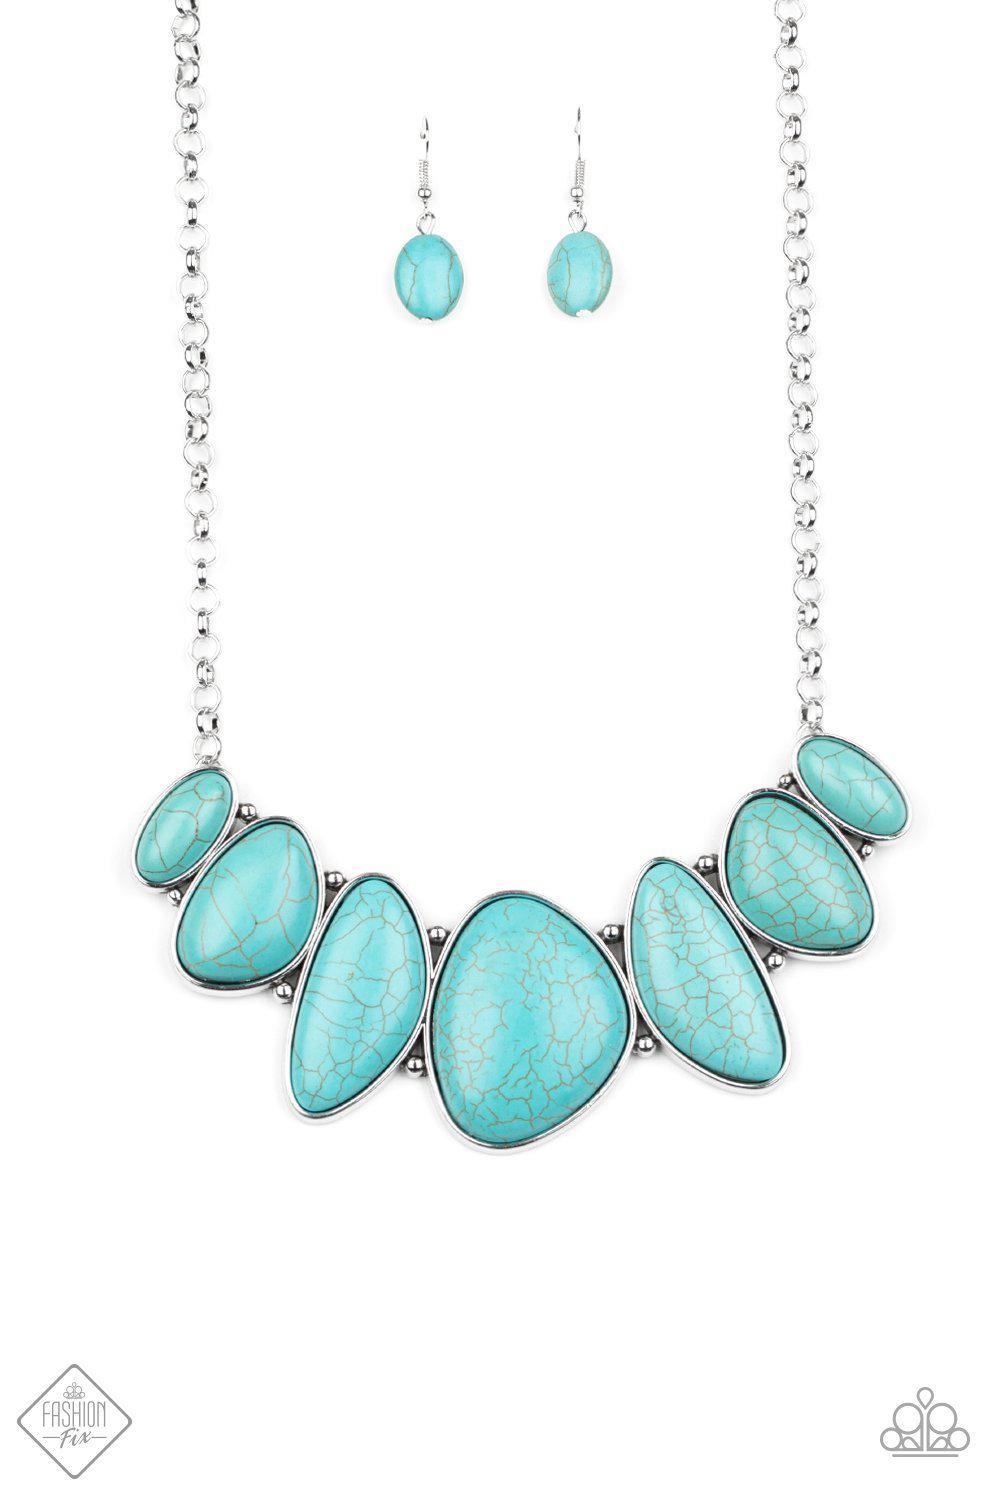 Primitive Turquoise Blue Stone Necklace - Paparazzi Accessories-CarasShop.com - $5 Jewelry by Cara Jewels